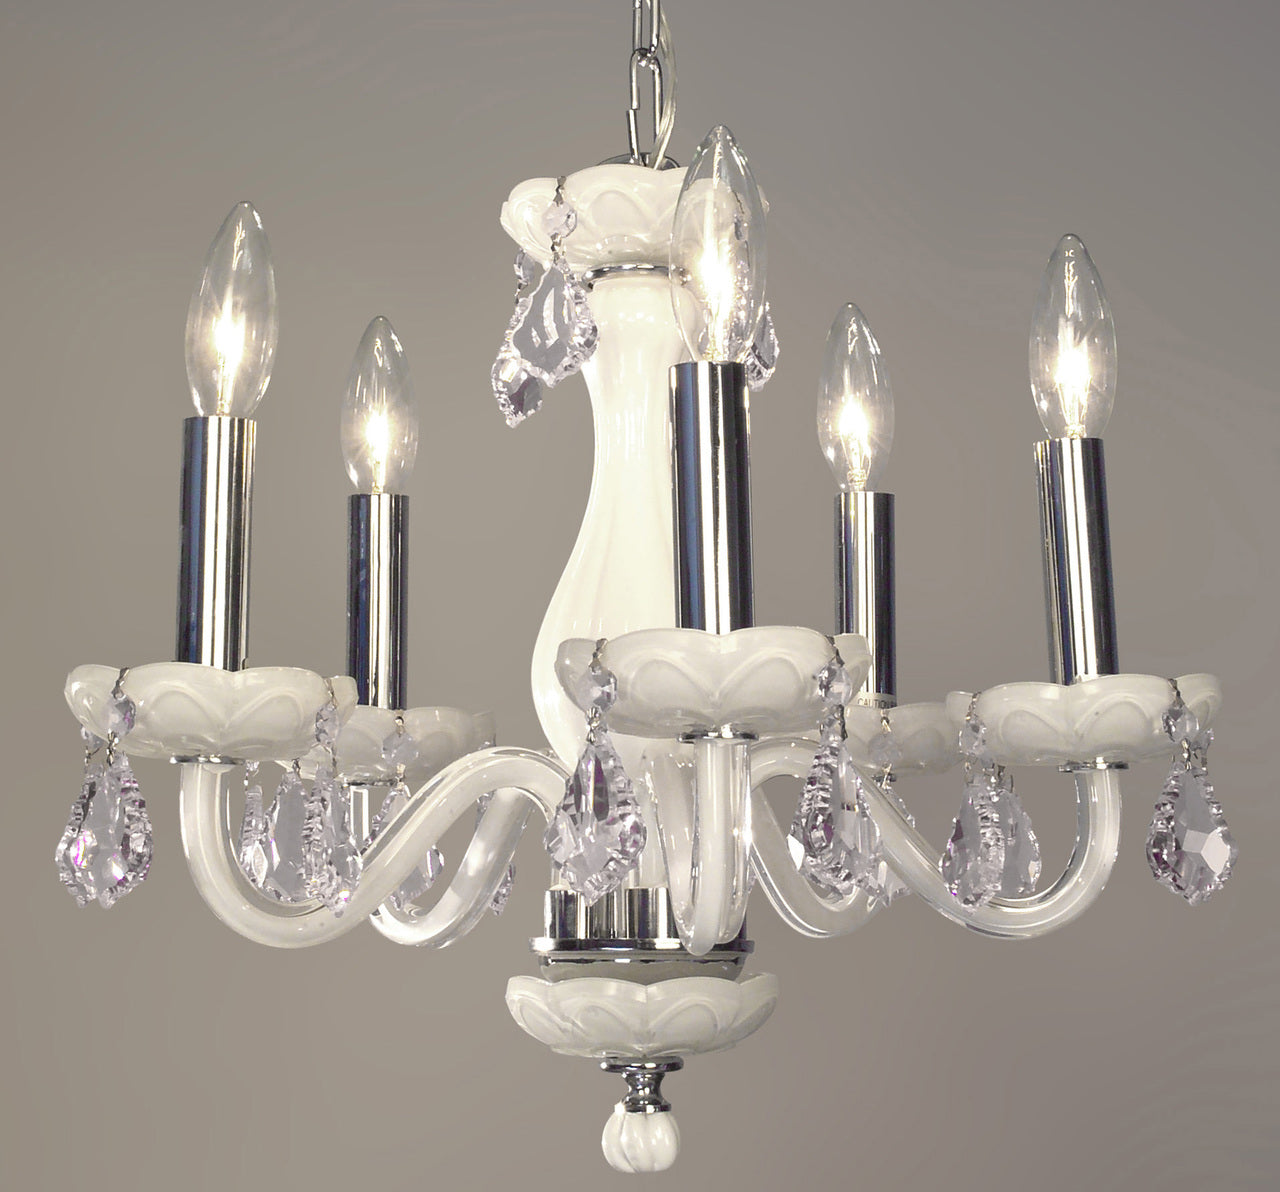 Classic Lighting 82045 WHT CPFR Monaco Crystal Chandelier in White (Imported from Spain)